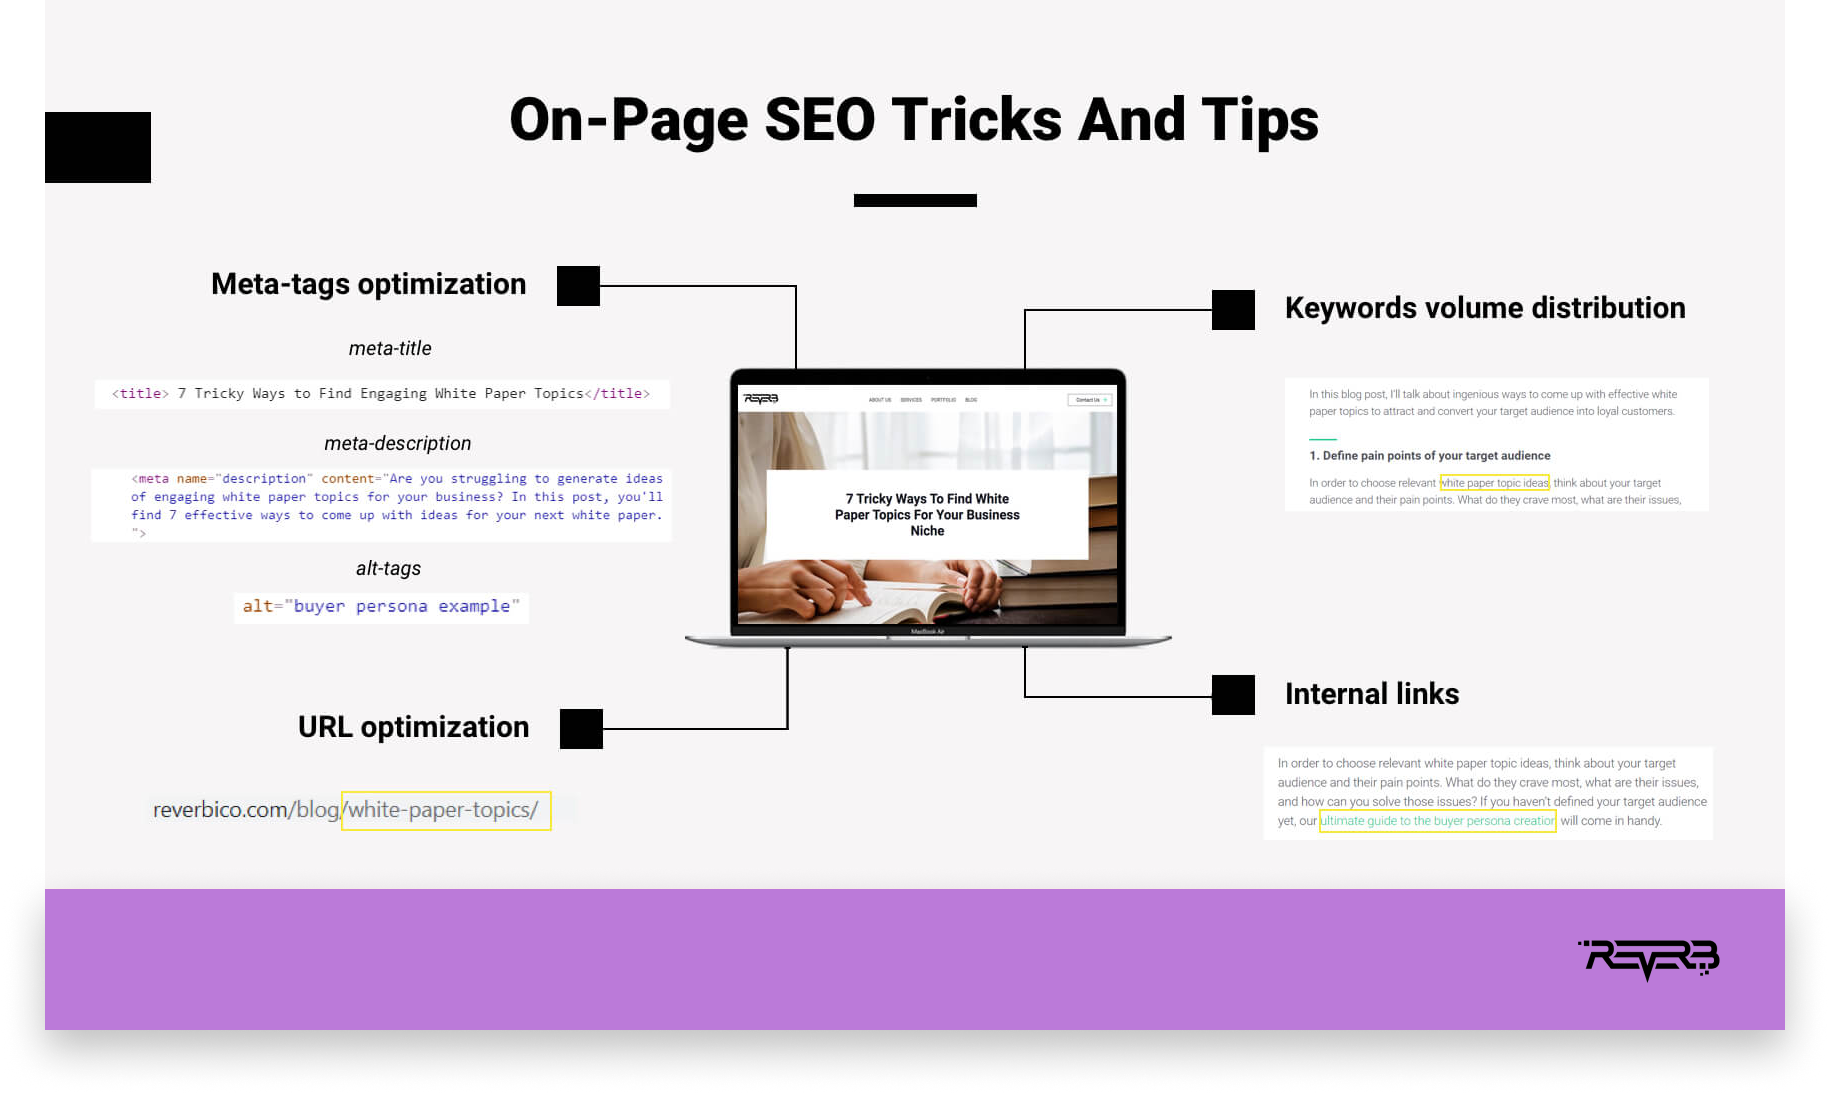 on-page seo tips and tricks tricks